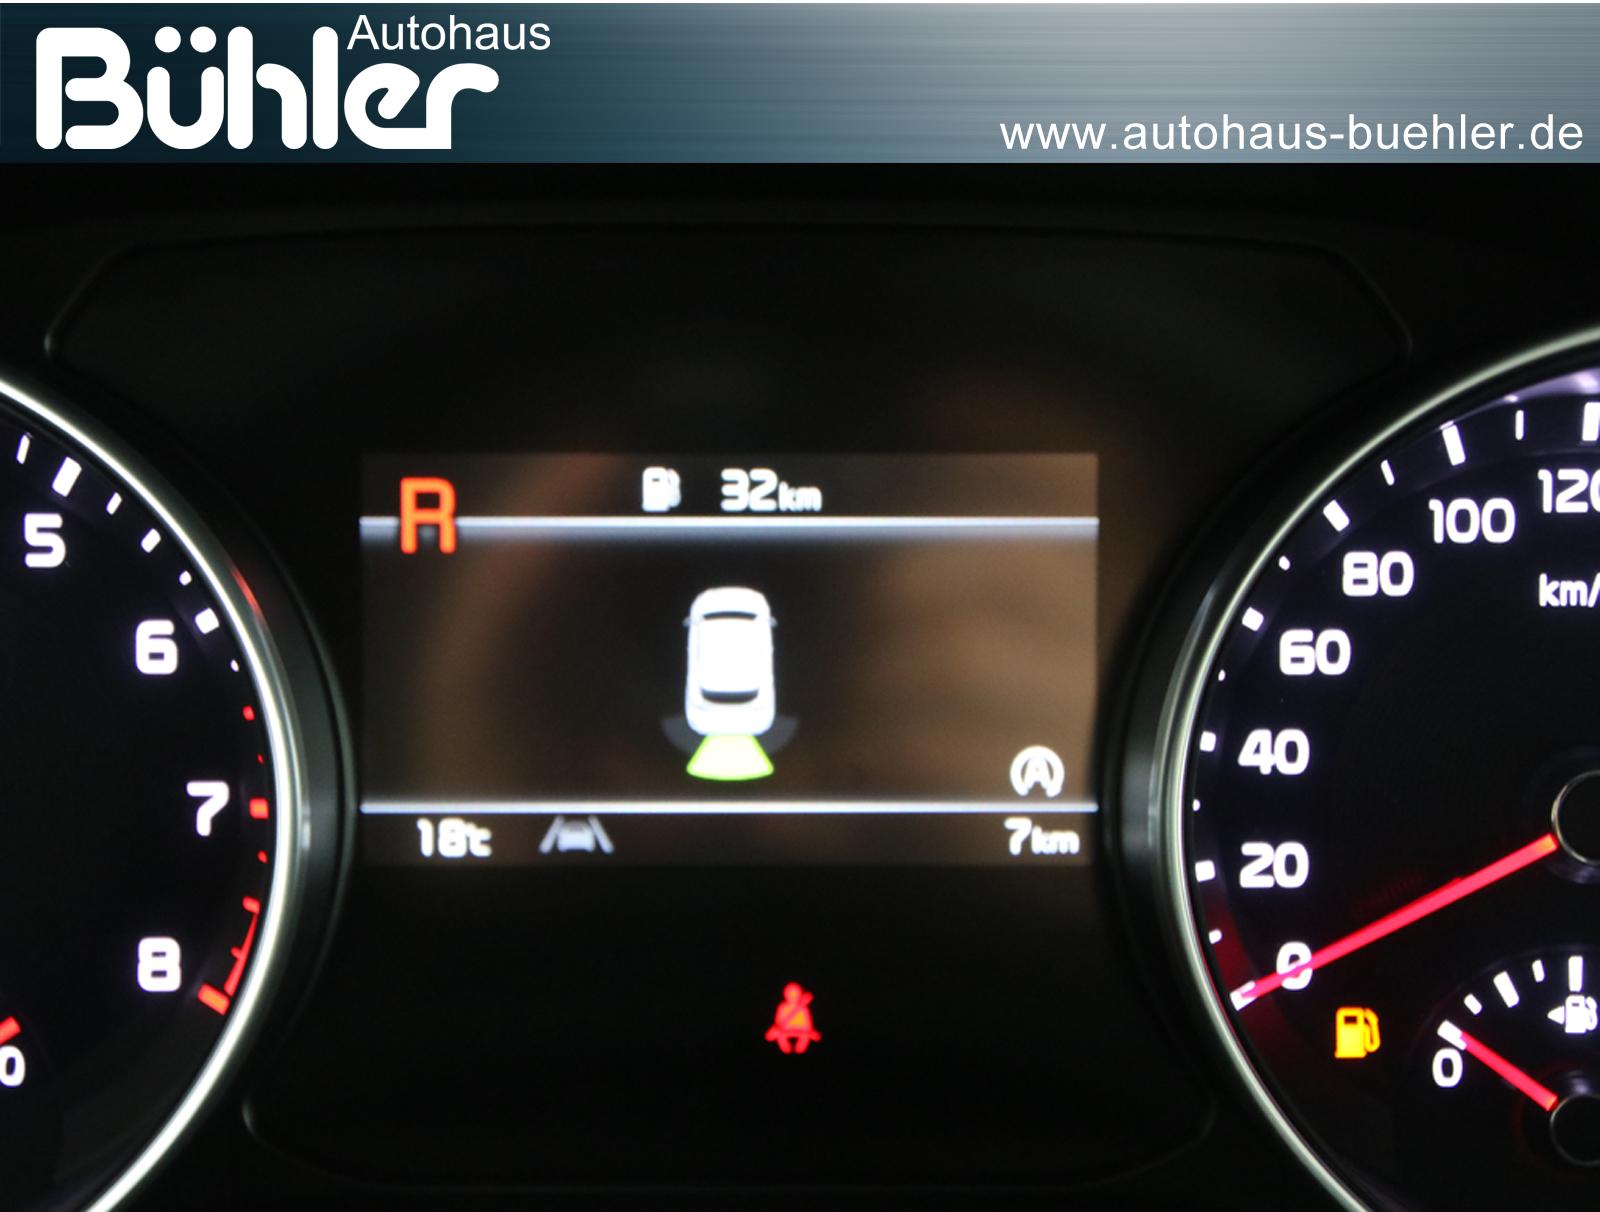 Ceed 1.5 T-GDI DCT Automati Vision LED - Interieur